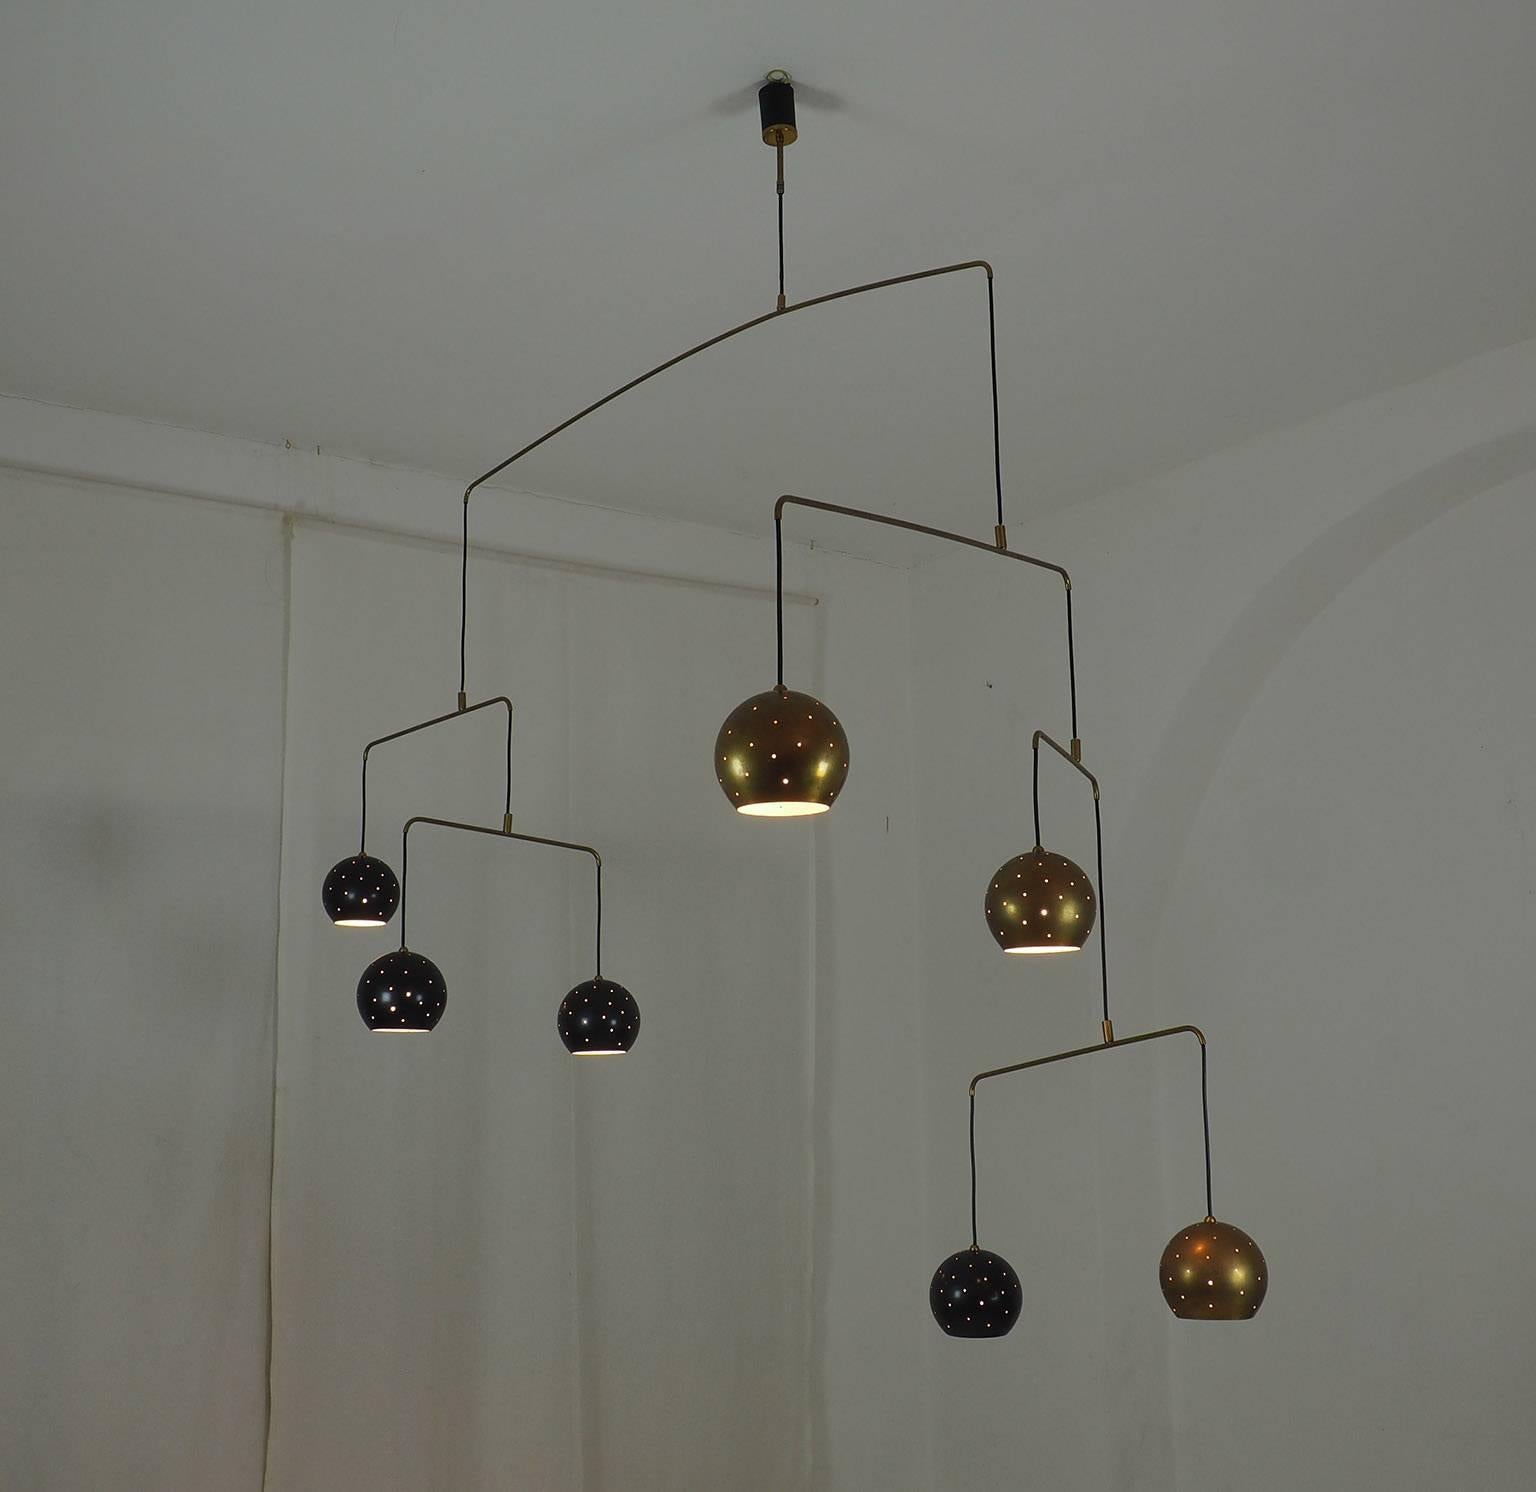 Original Italian brass mobile chandelier manufactured in a very small handcraft production in Milano.
Large, magic and poetical mobile chandelier with brass and black suspending spheres; it can moves with the flow of air.
Wholly in balance through